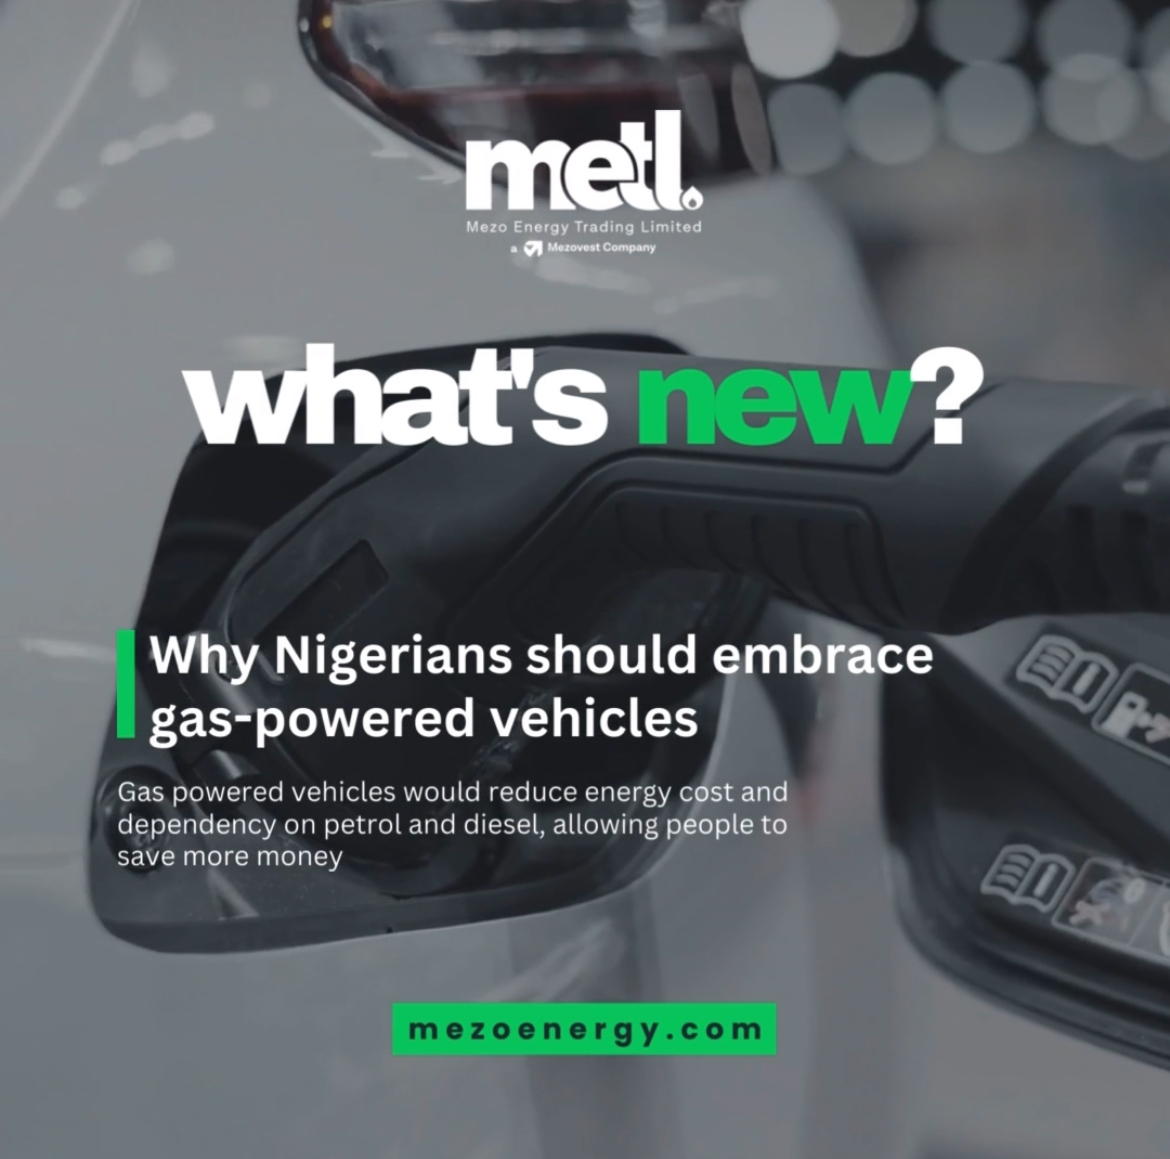 Director-General, National Automotive Design and development Council (NADDC), Joseph Osanipin has outlined the benefits of adoption of gas-powered vehicles by Nigerians.

Thread 👇🏽👇🏽👇🏽